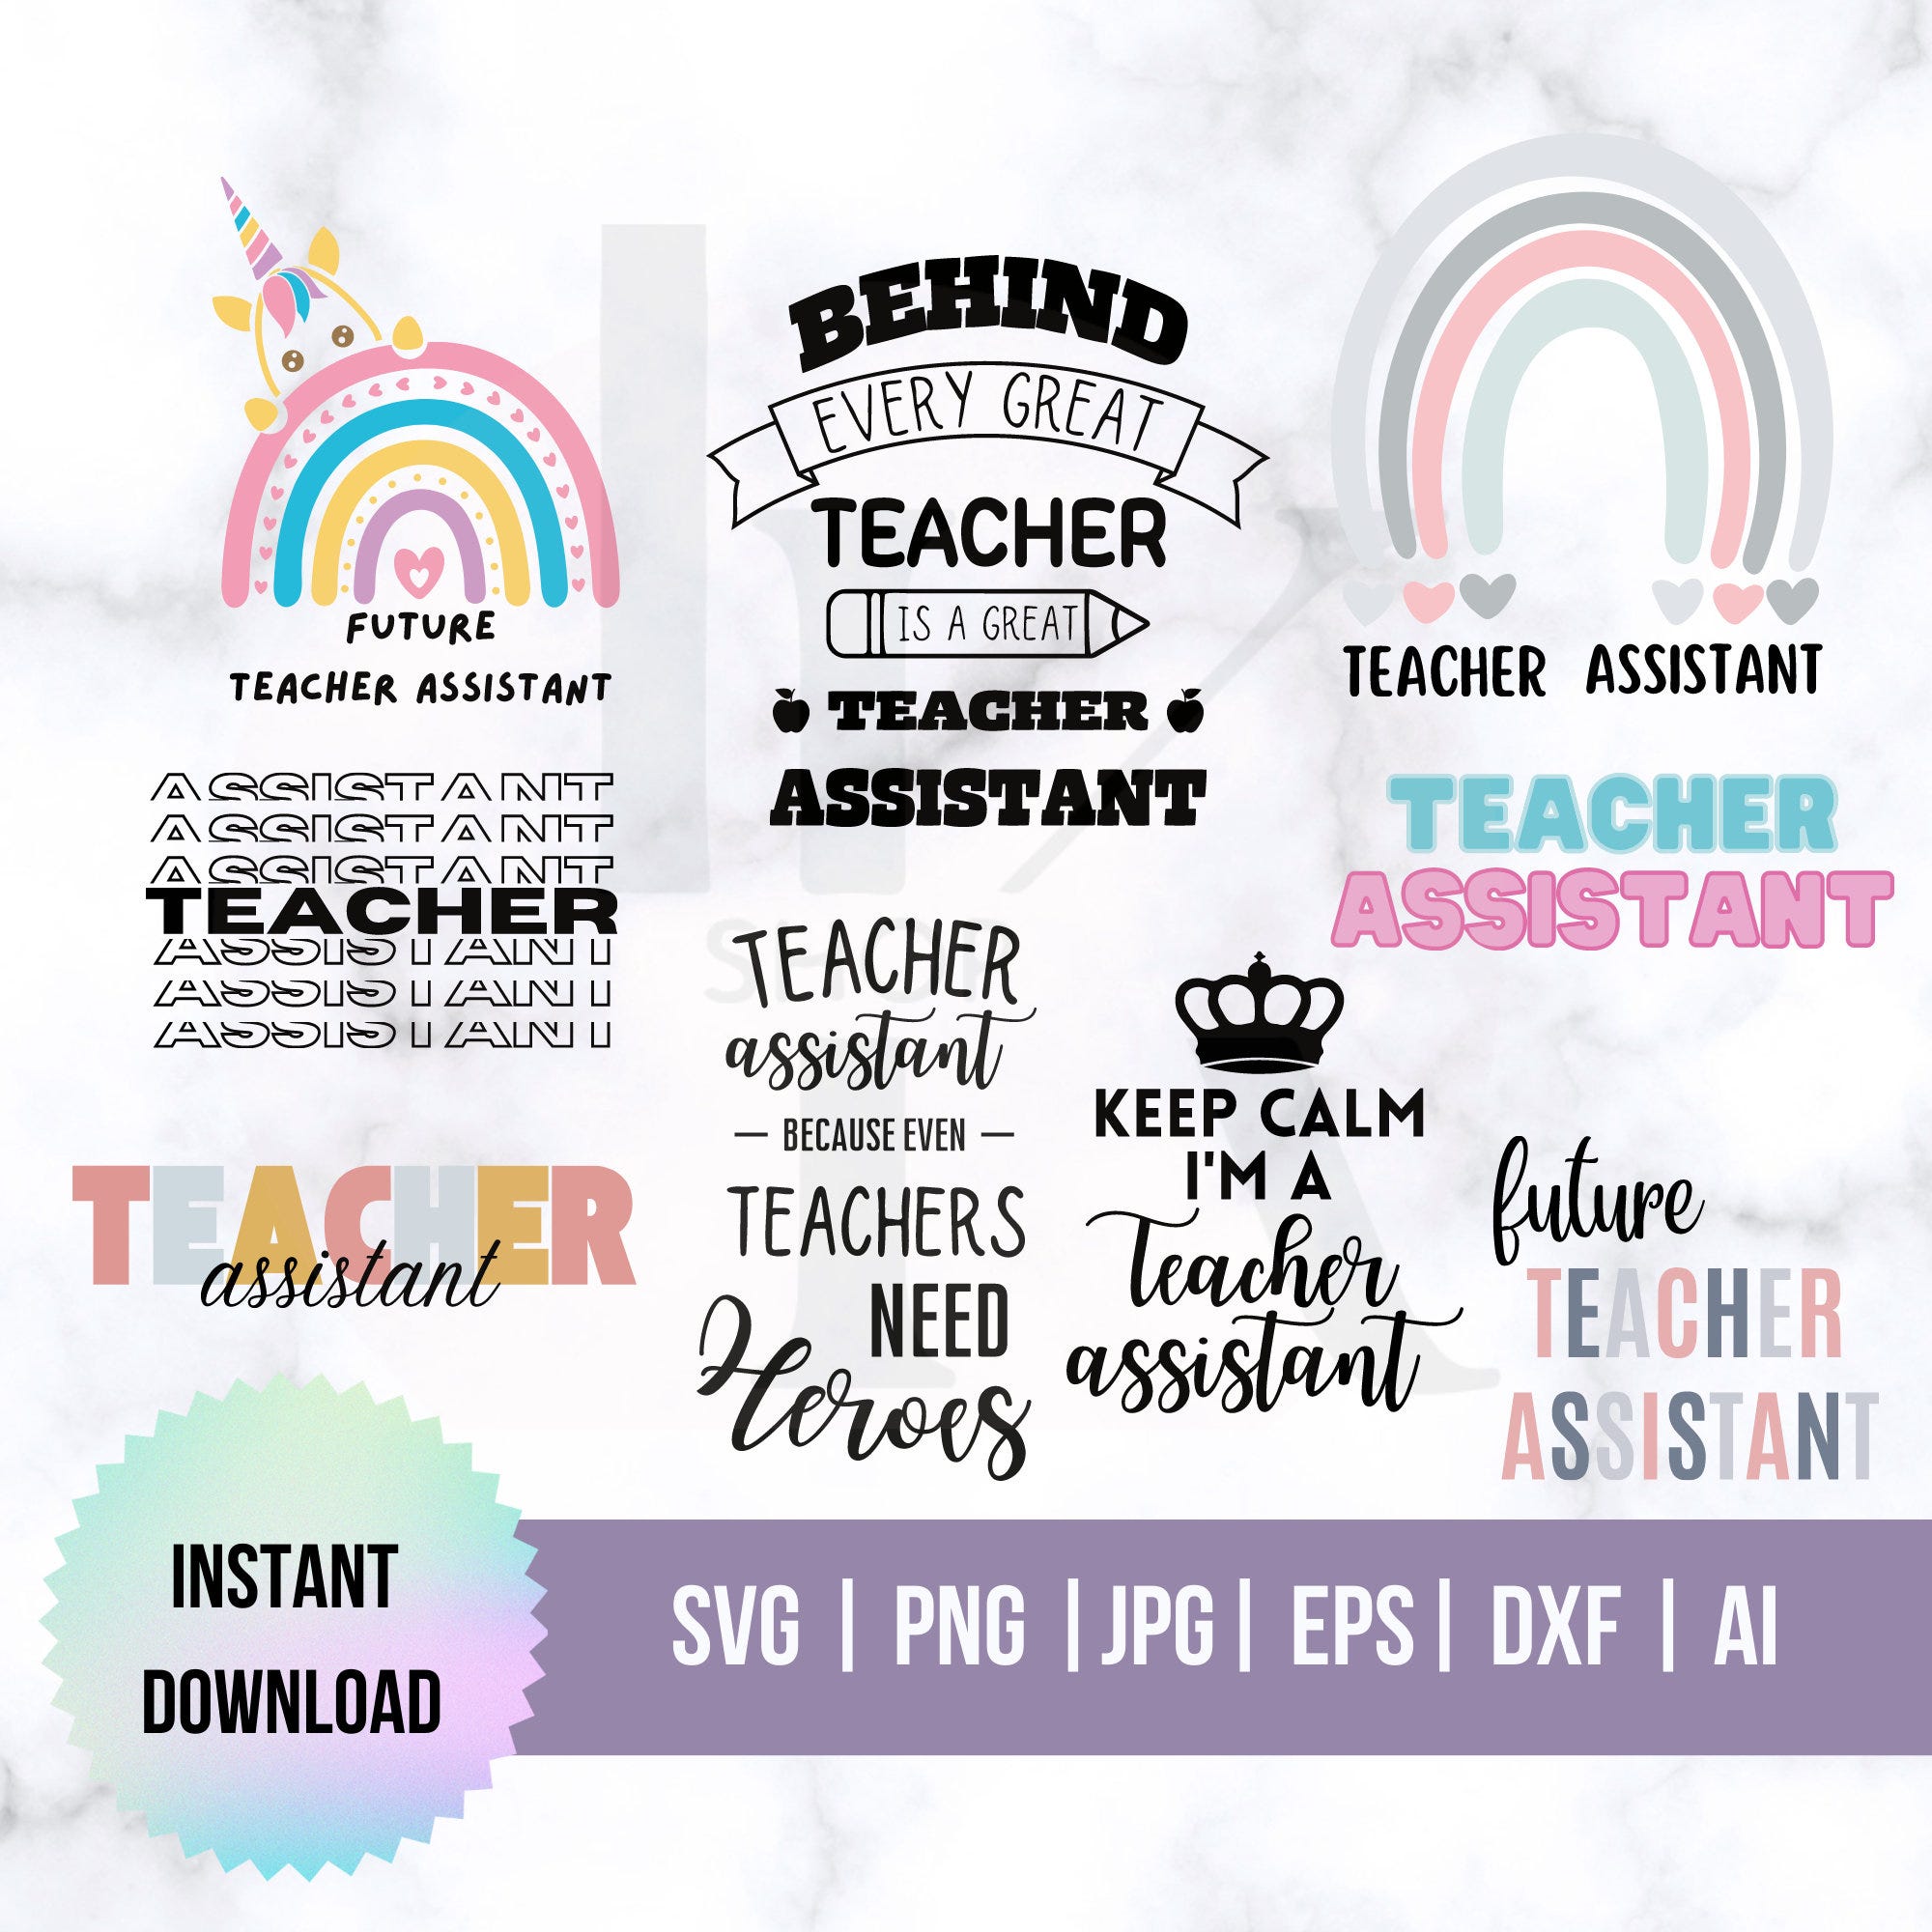 Teacher Assistant Svg Png Bundle Back To School Teacher Assistant Rainbow Teacherlife Quotes Teacher Need Heroes print sticker